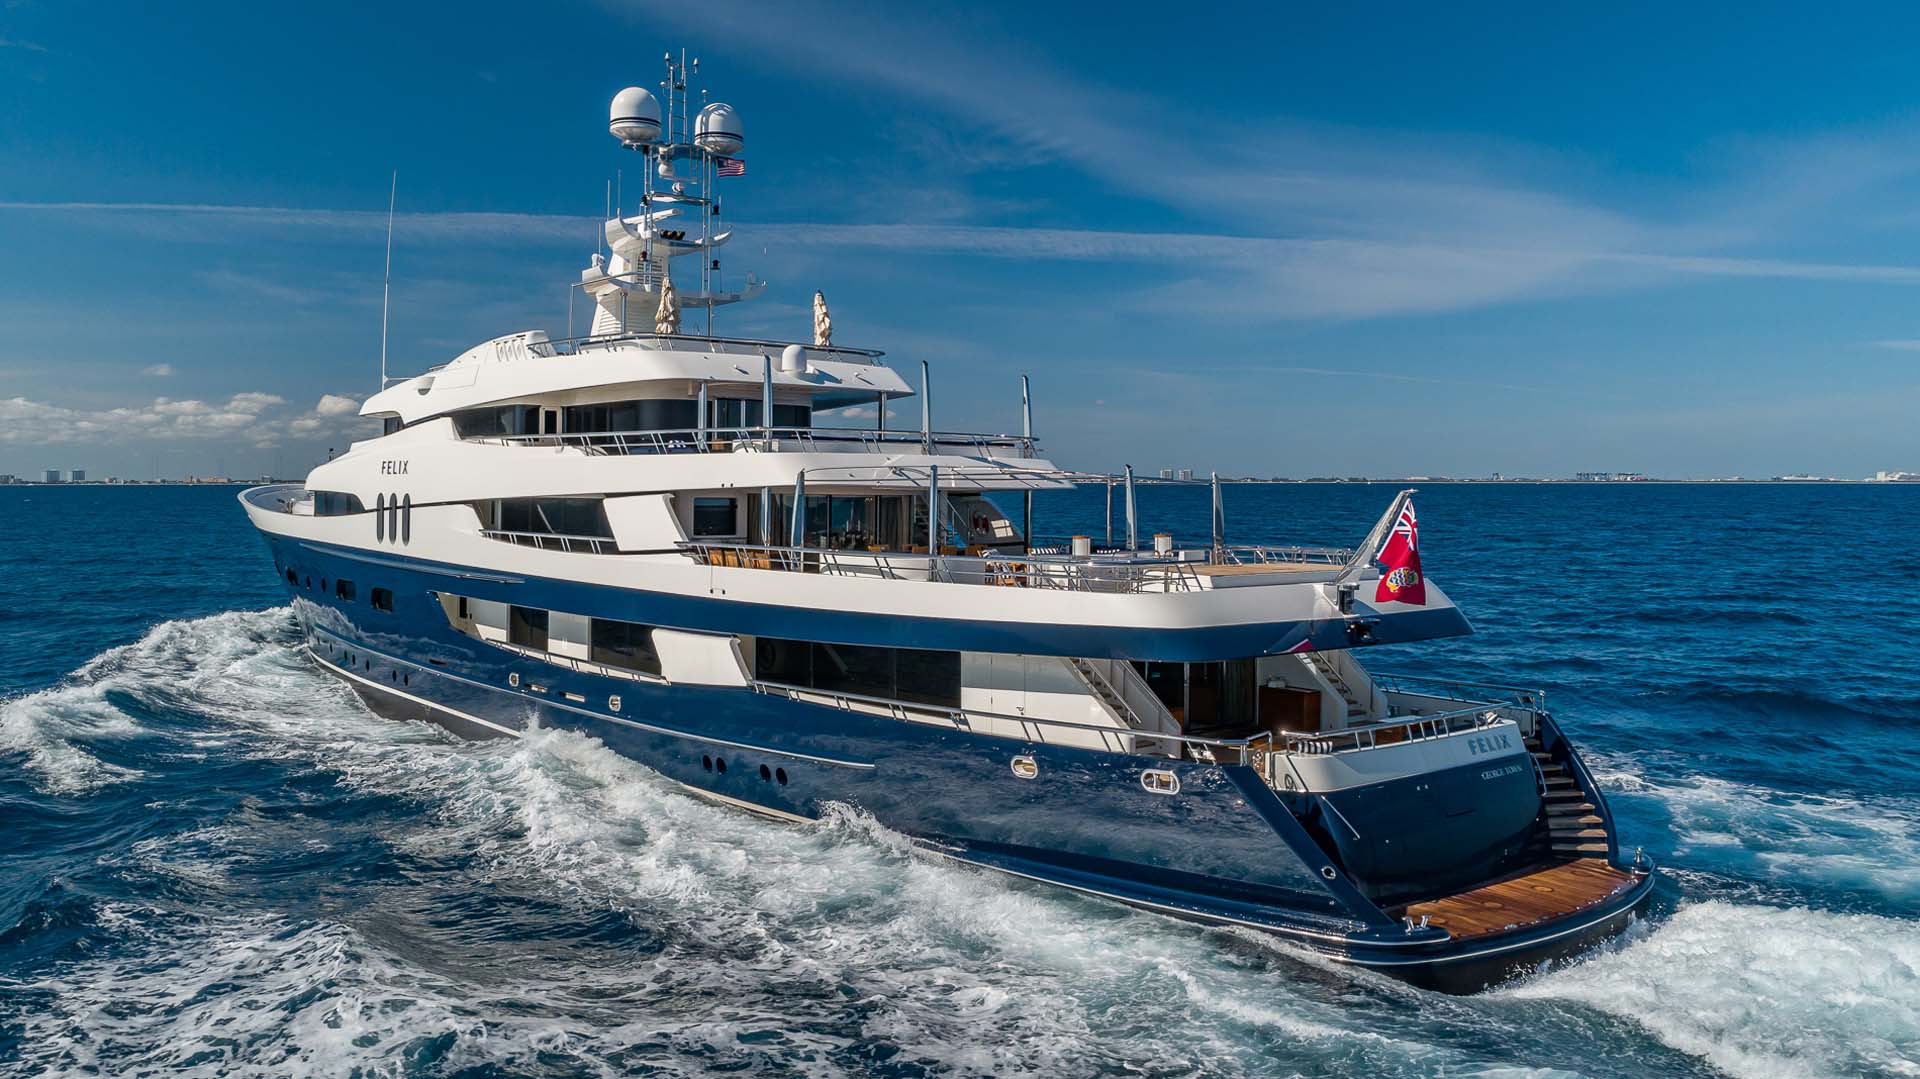 70 meter yacht for charter